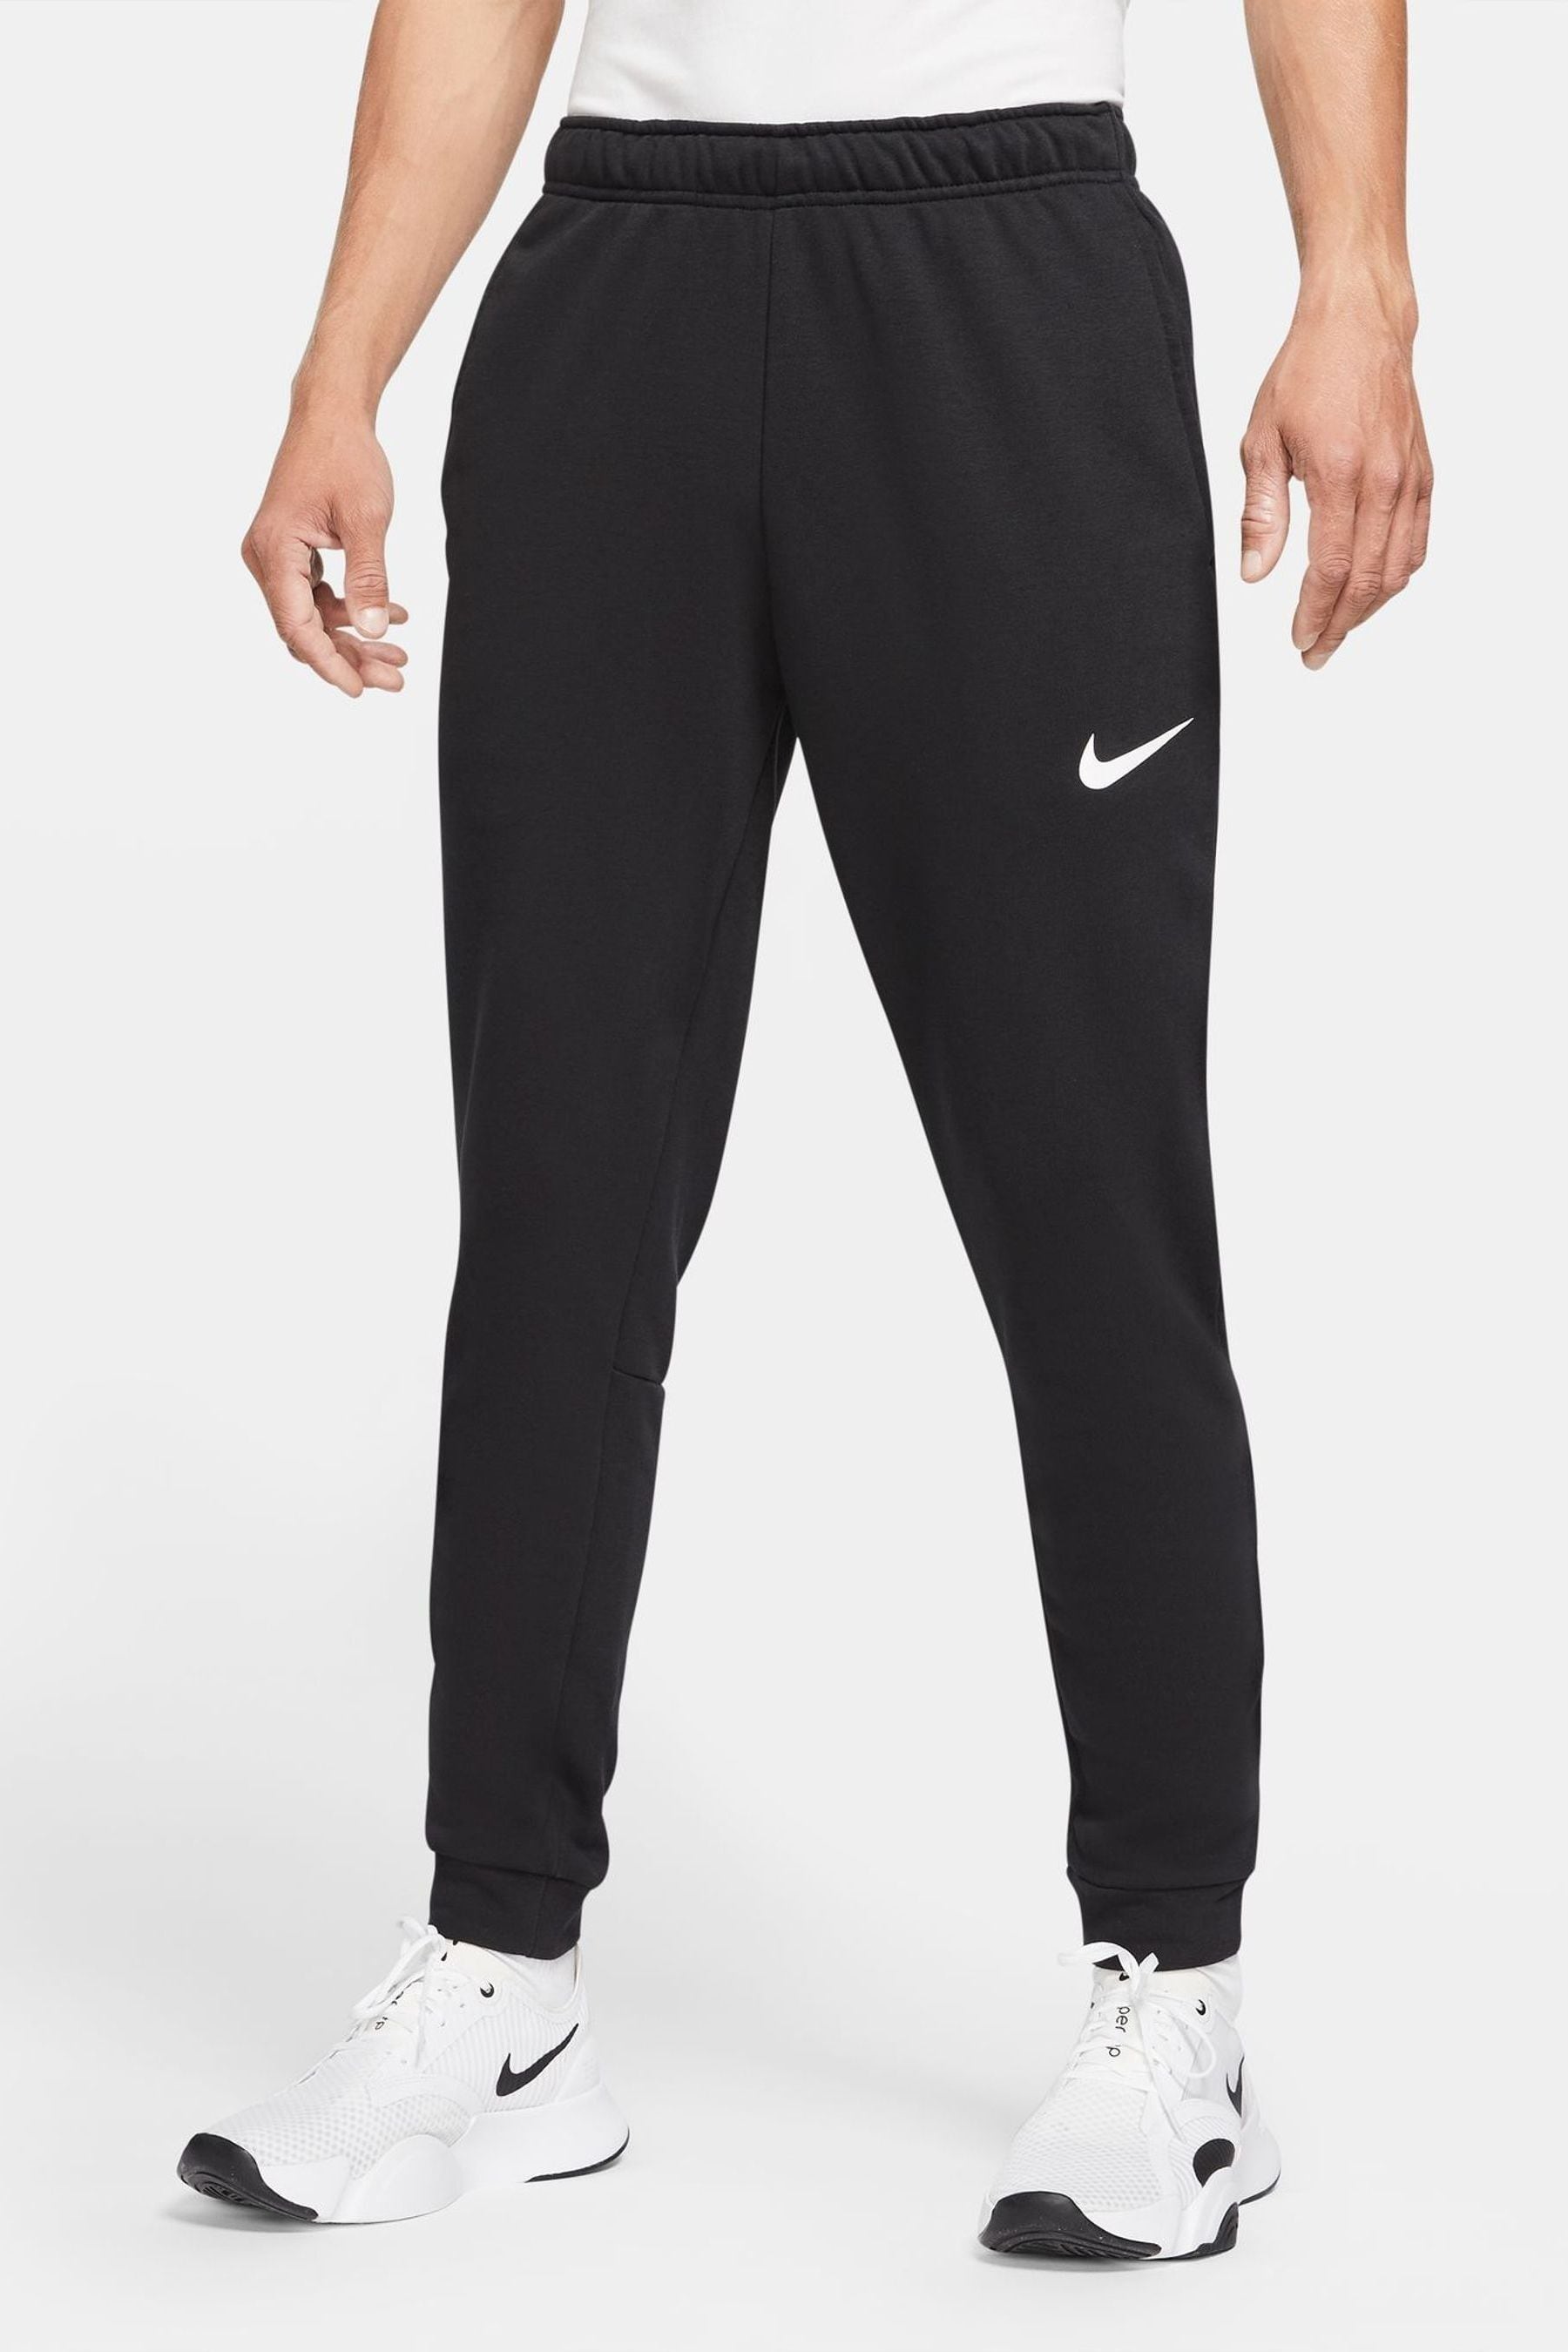 Buy Nike Black Dri-FIT Tapered Training Joggers from the Next UK online ...